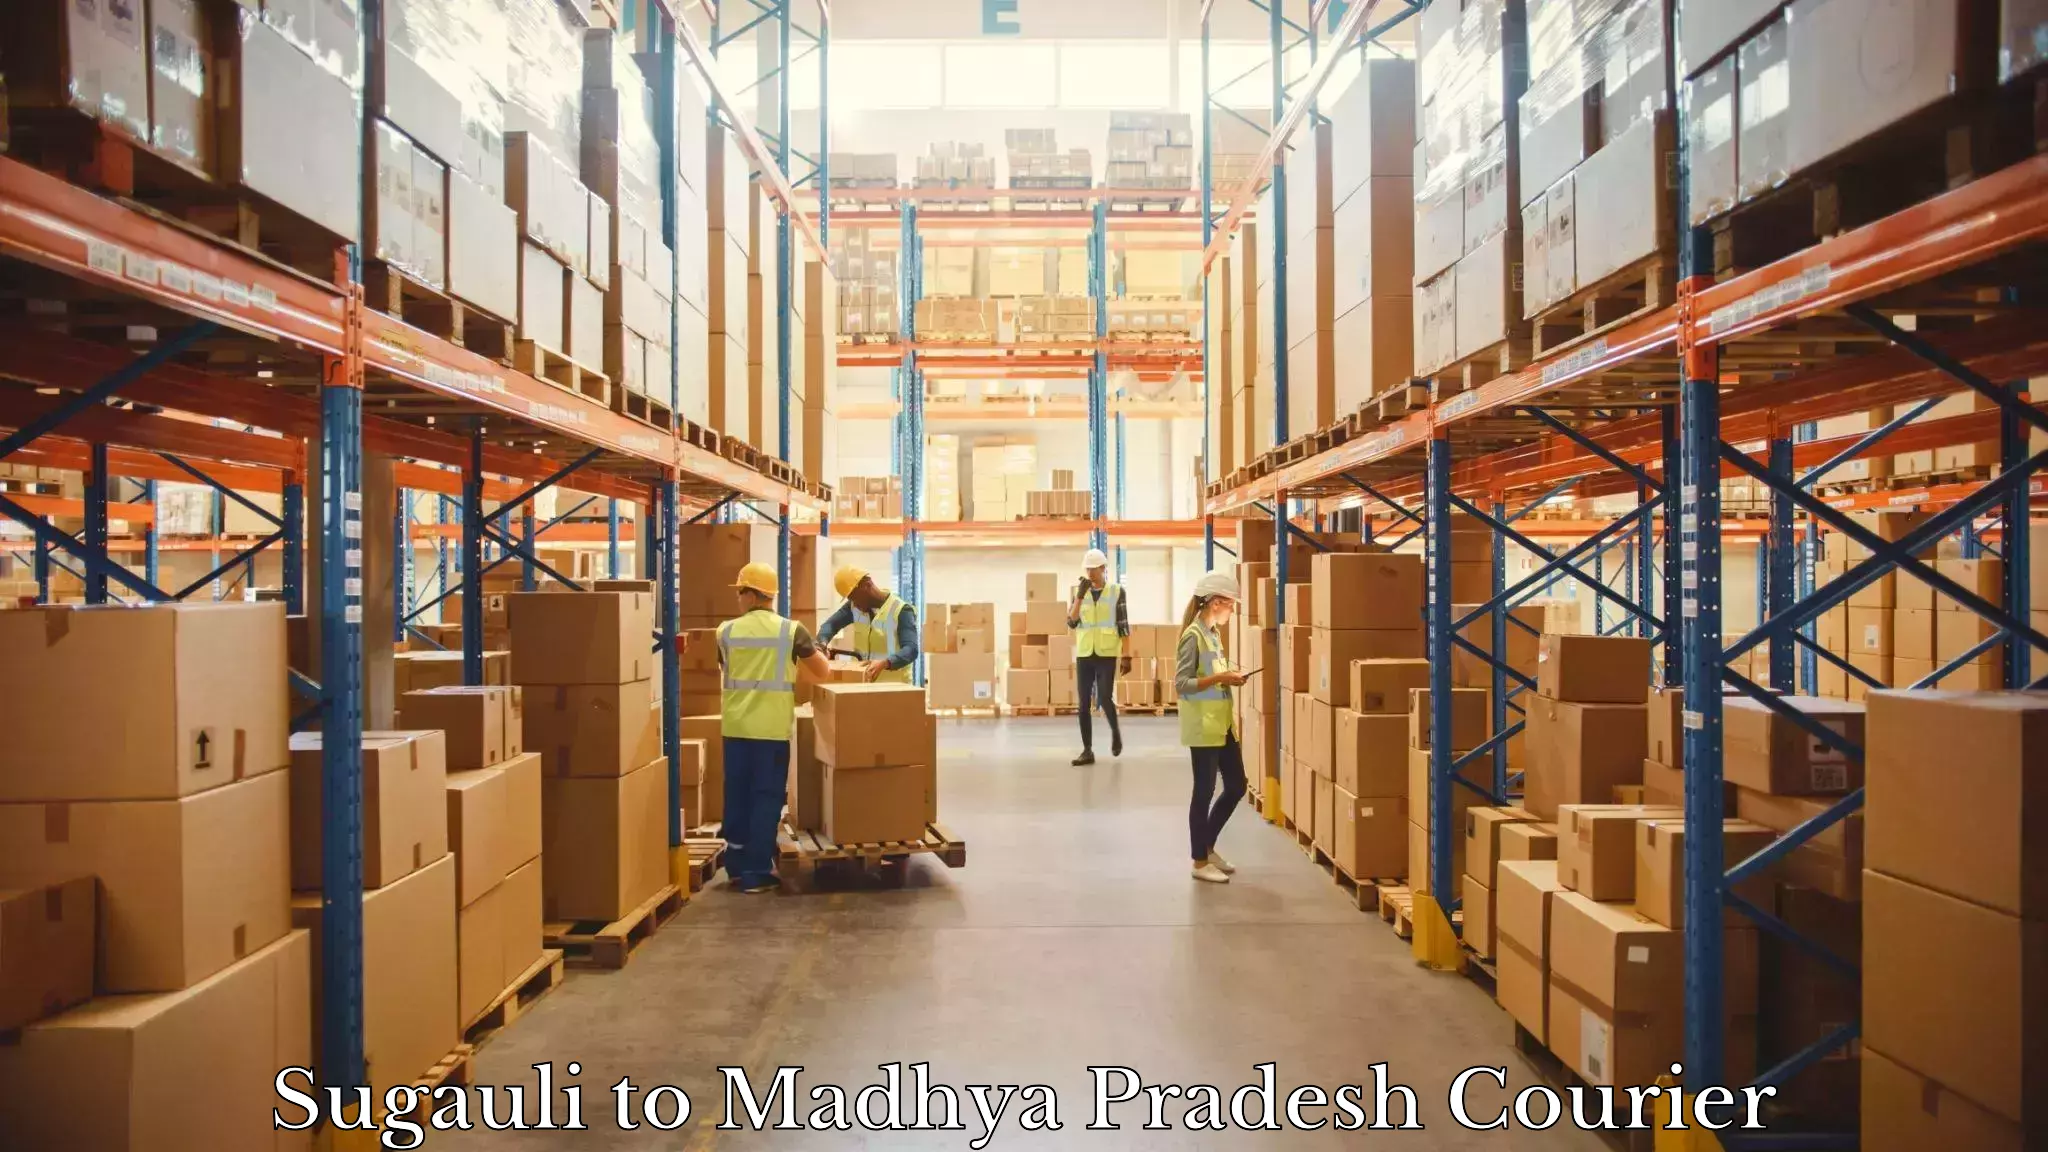 High-capacity shipping options in Sugauli to Madwas